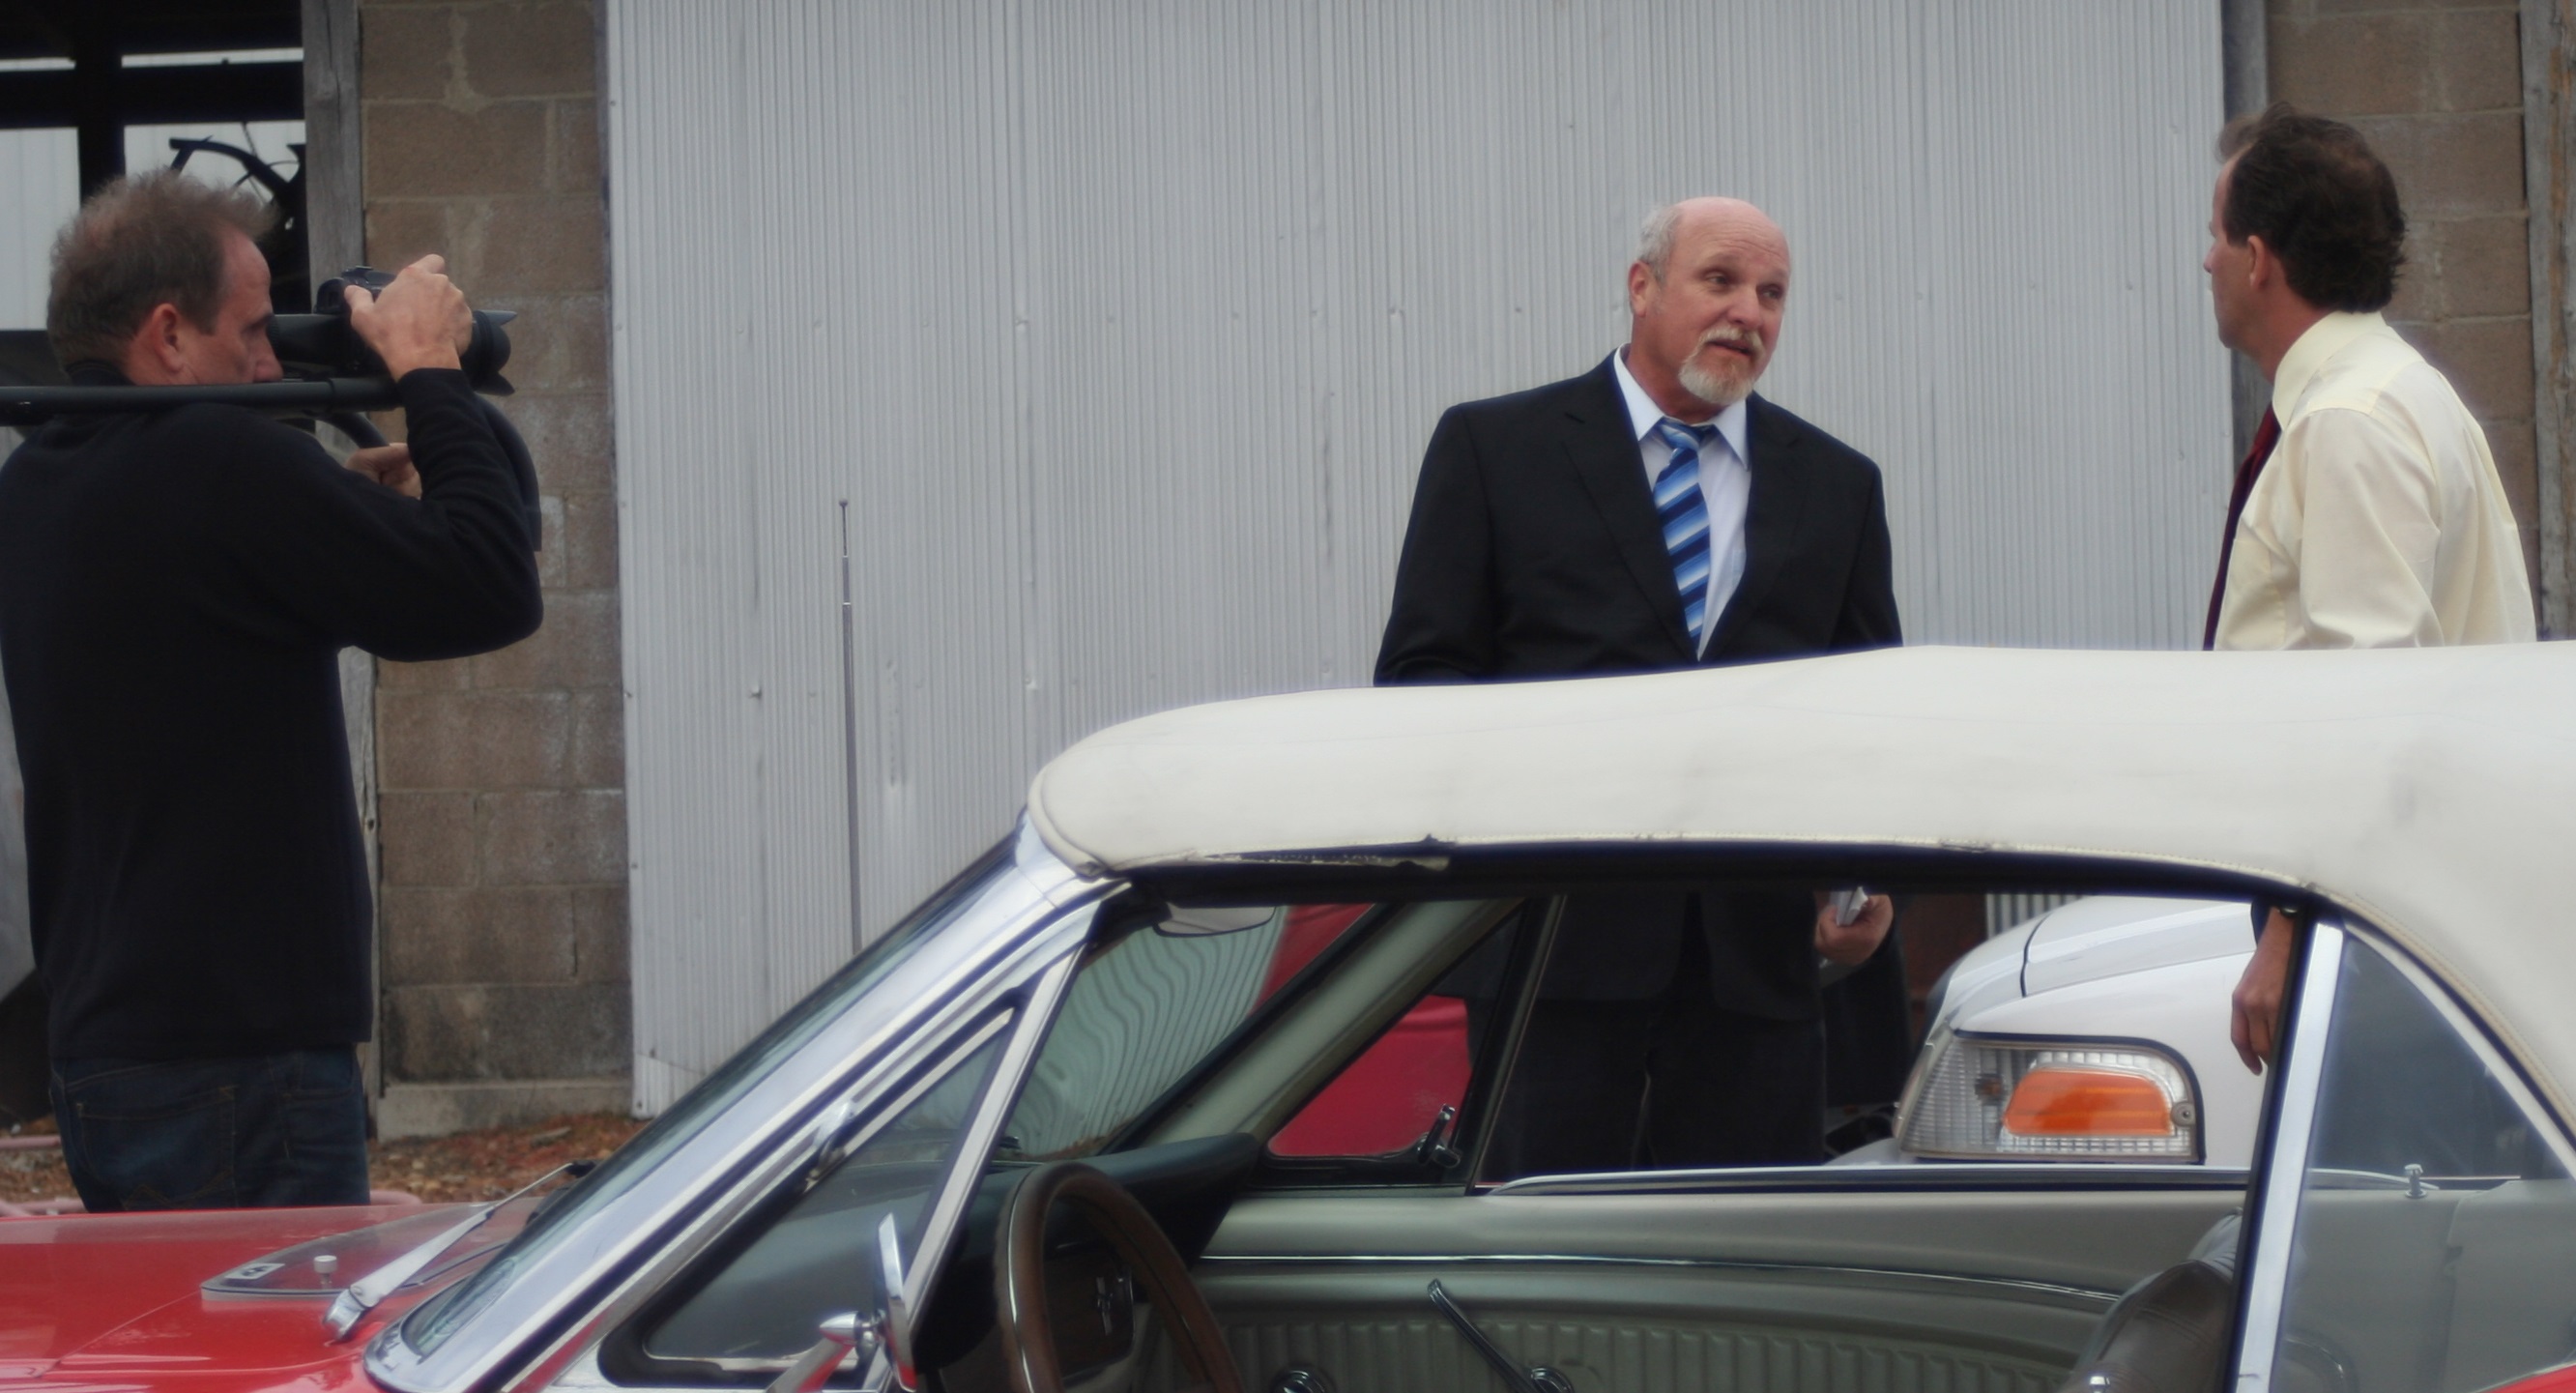 On set of the filming of Another Chance with Actors, Rick Bucy as Det. Hill and Donald Fleming as Dobbs.